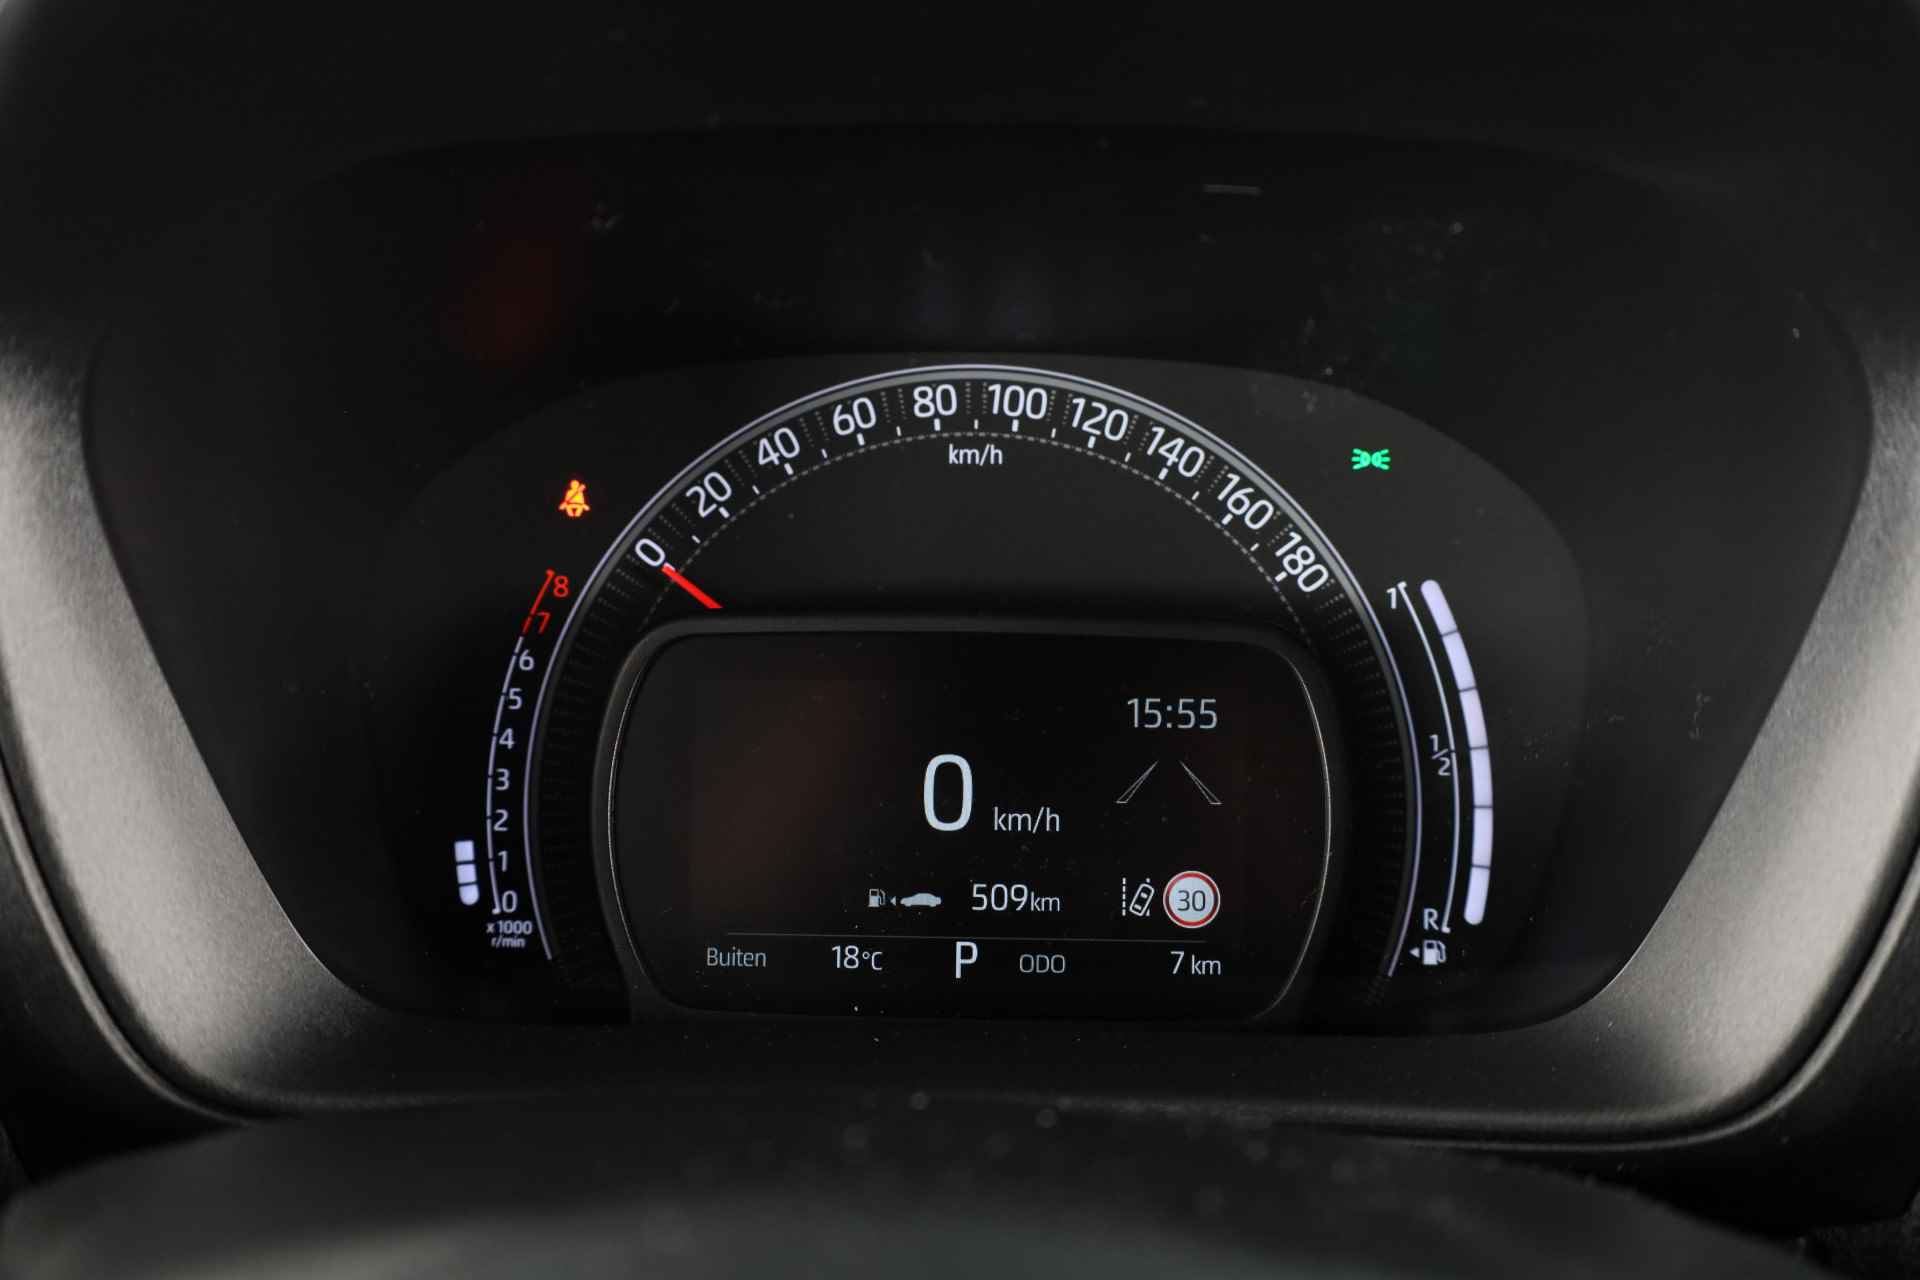 Toyota Aygo X 1.0 VVT-i S-CVT Automaat Pulse *Demo* | LED Verlichting | Climate Control | - 7/36